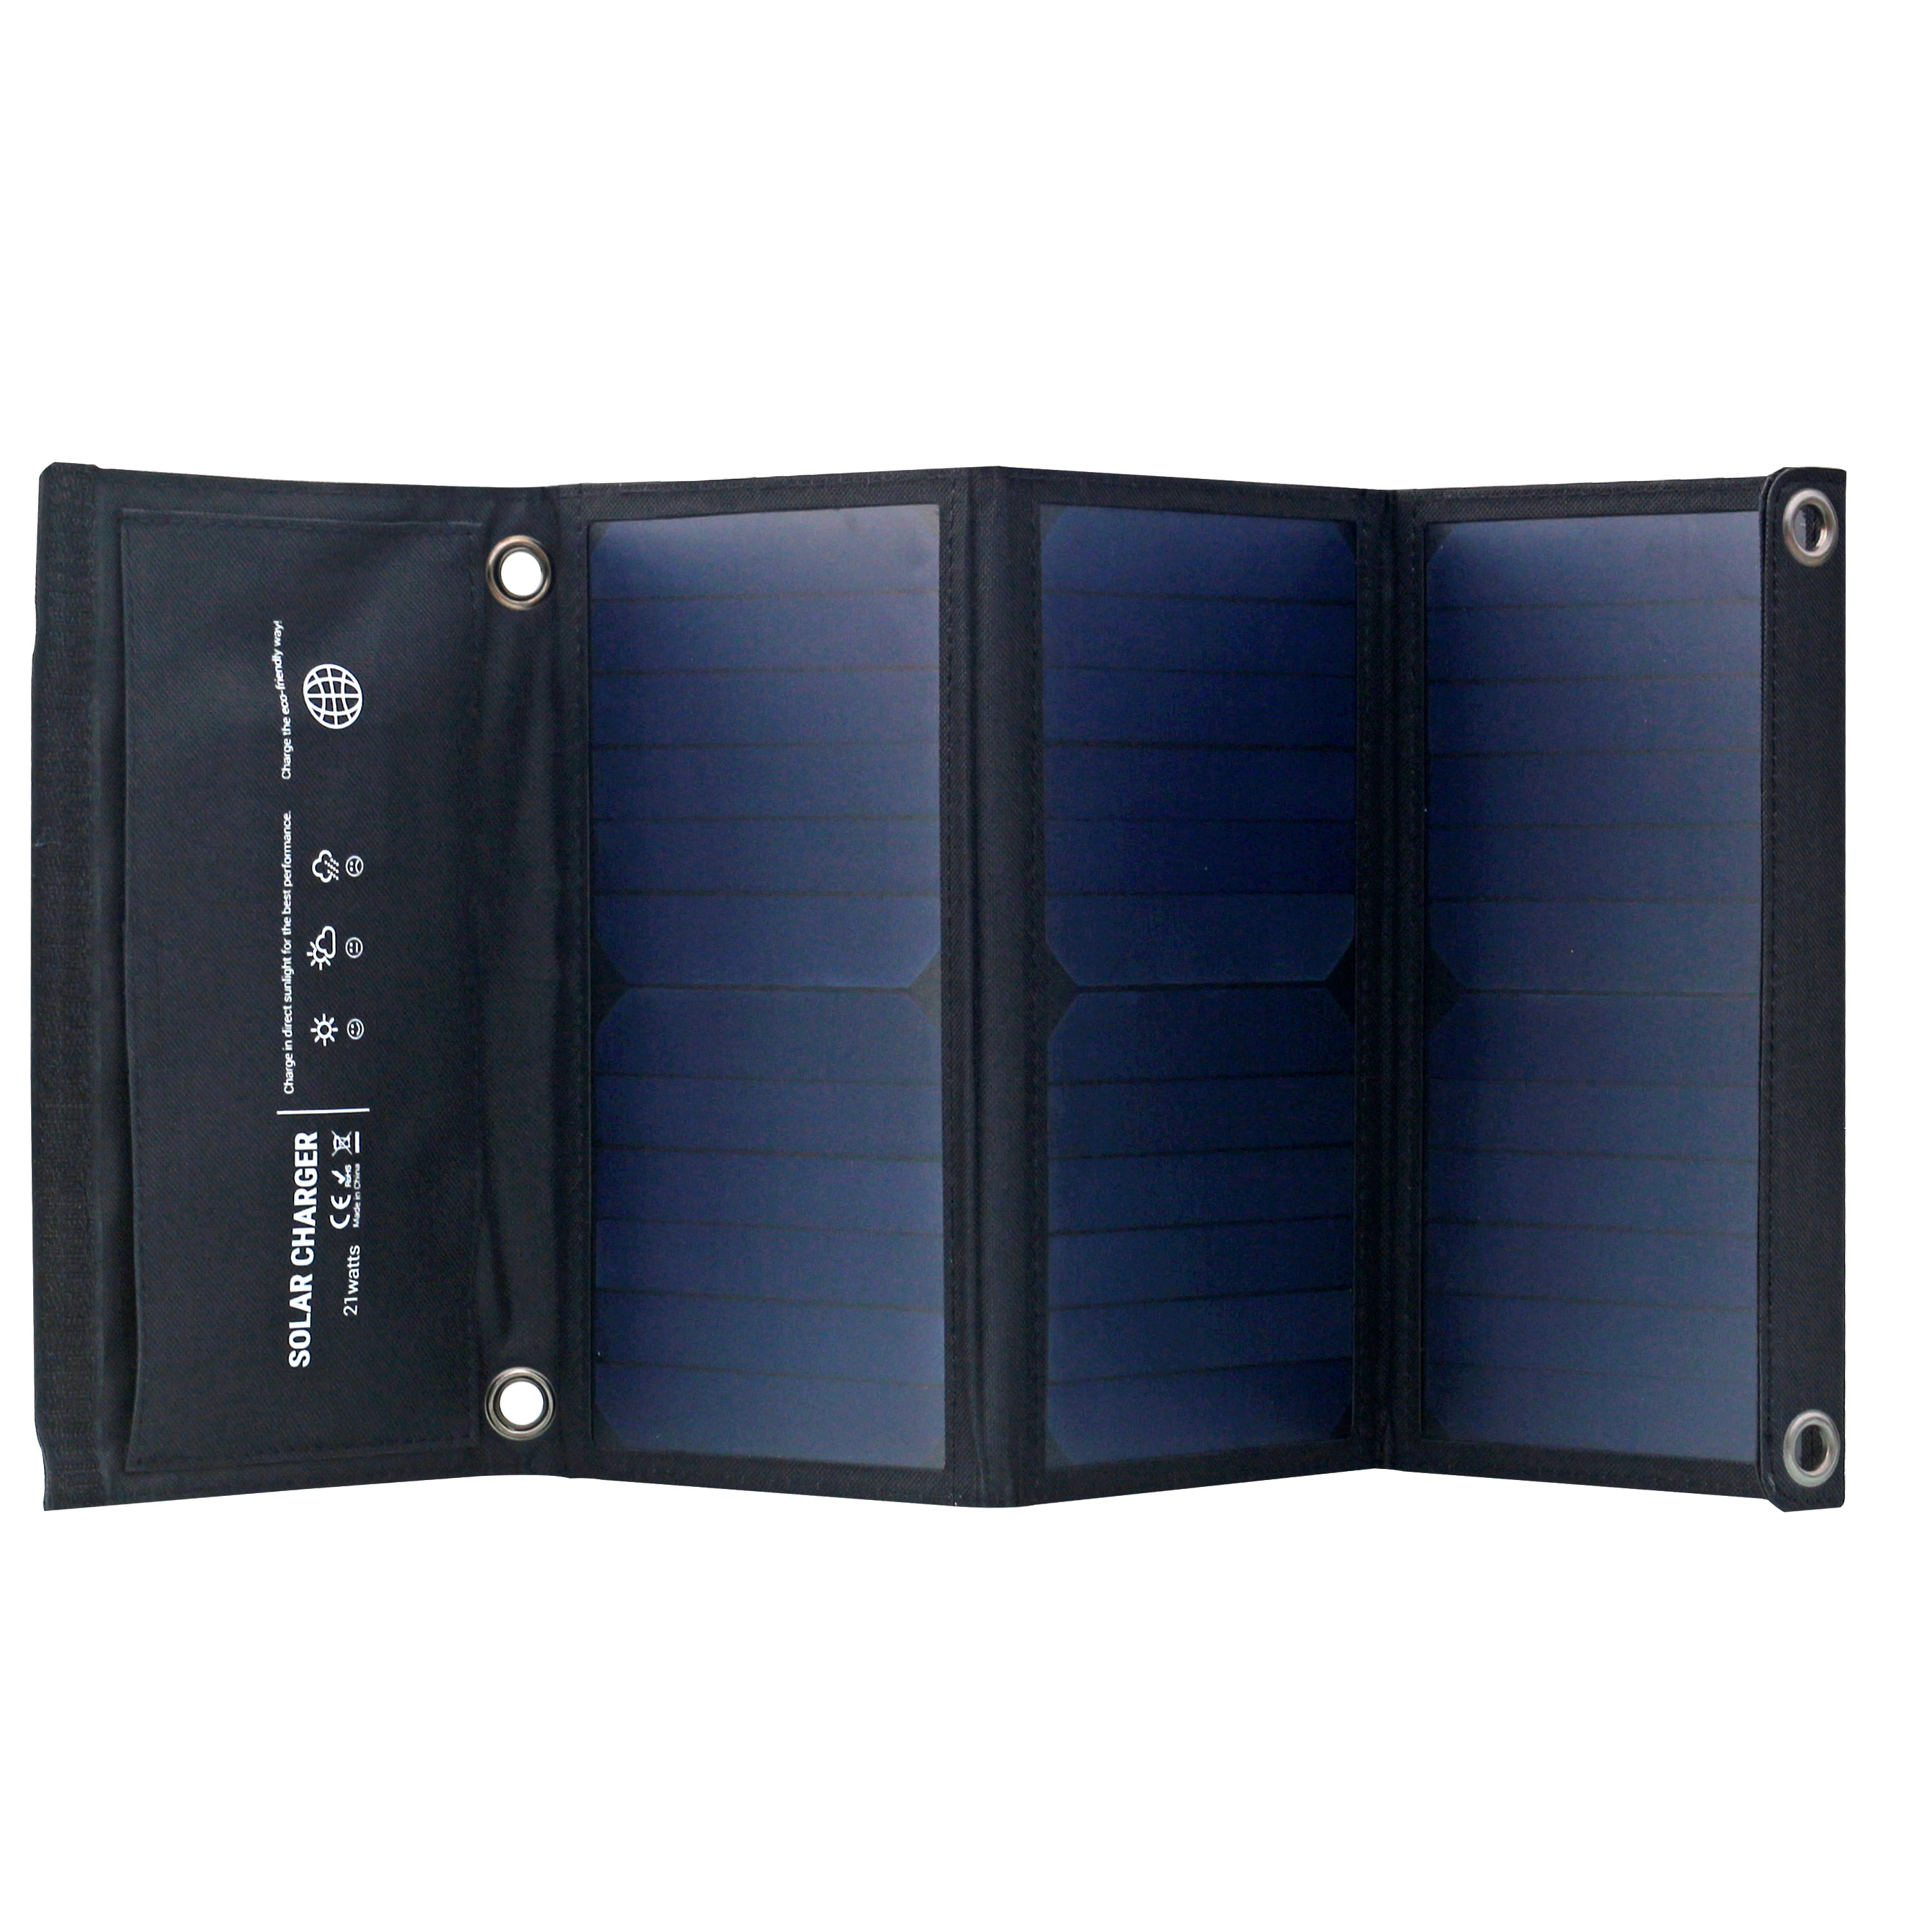 China Gold Supplier for Good Solar Power Bank -
 OEM wholesales  efficiently 21w sun-power foldable solar panel charger 5V2A solar charger waterproof  – EEON